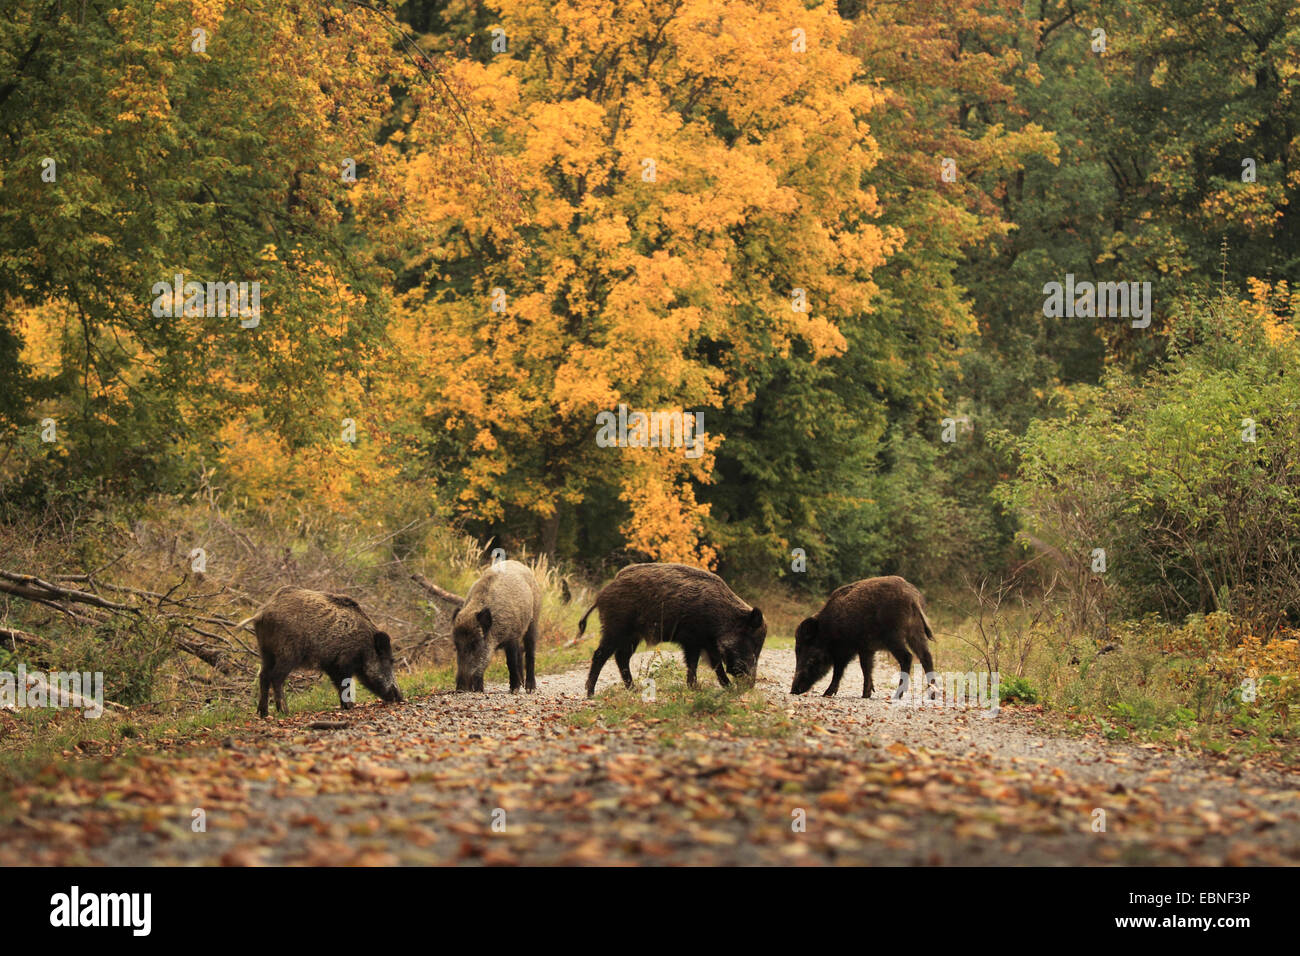 wild boar, pig, wild boar (Sus scrofa), vier wild boars on a forest path in autumn, Germany, Baden-Wuerttemberg Stock Photo